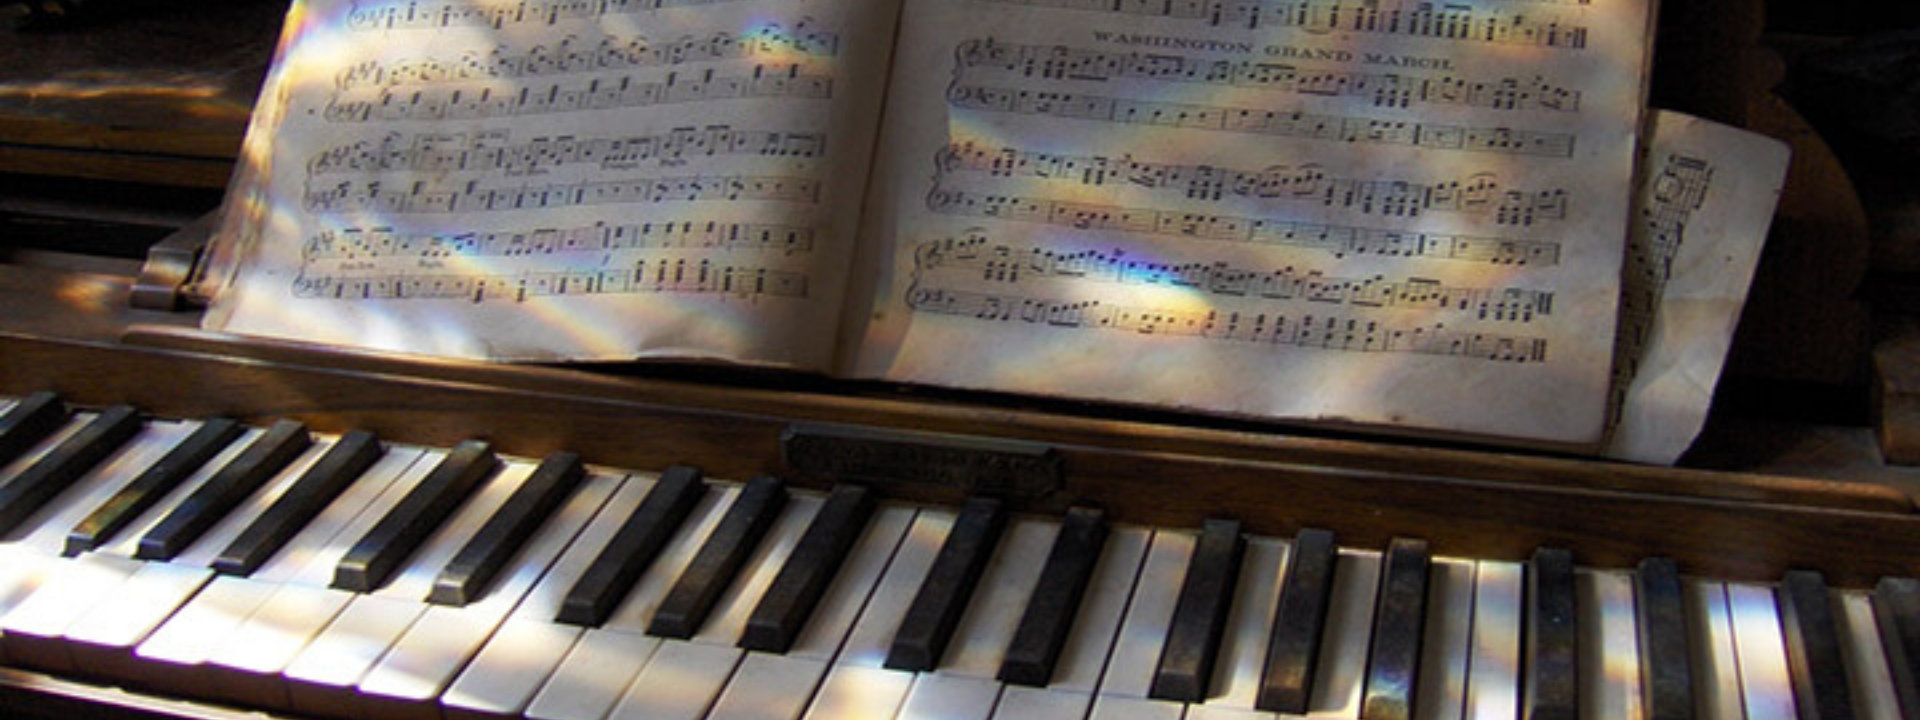 Music notes on sheet music above a piano